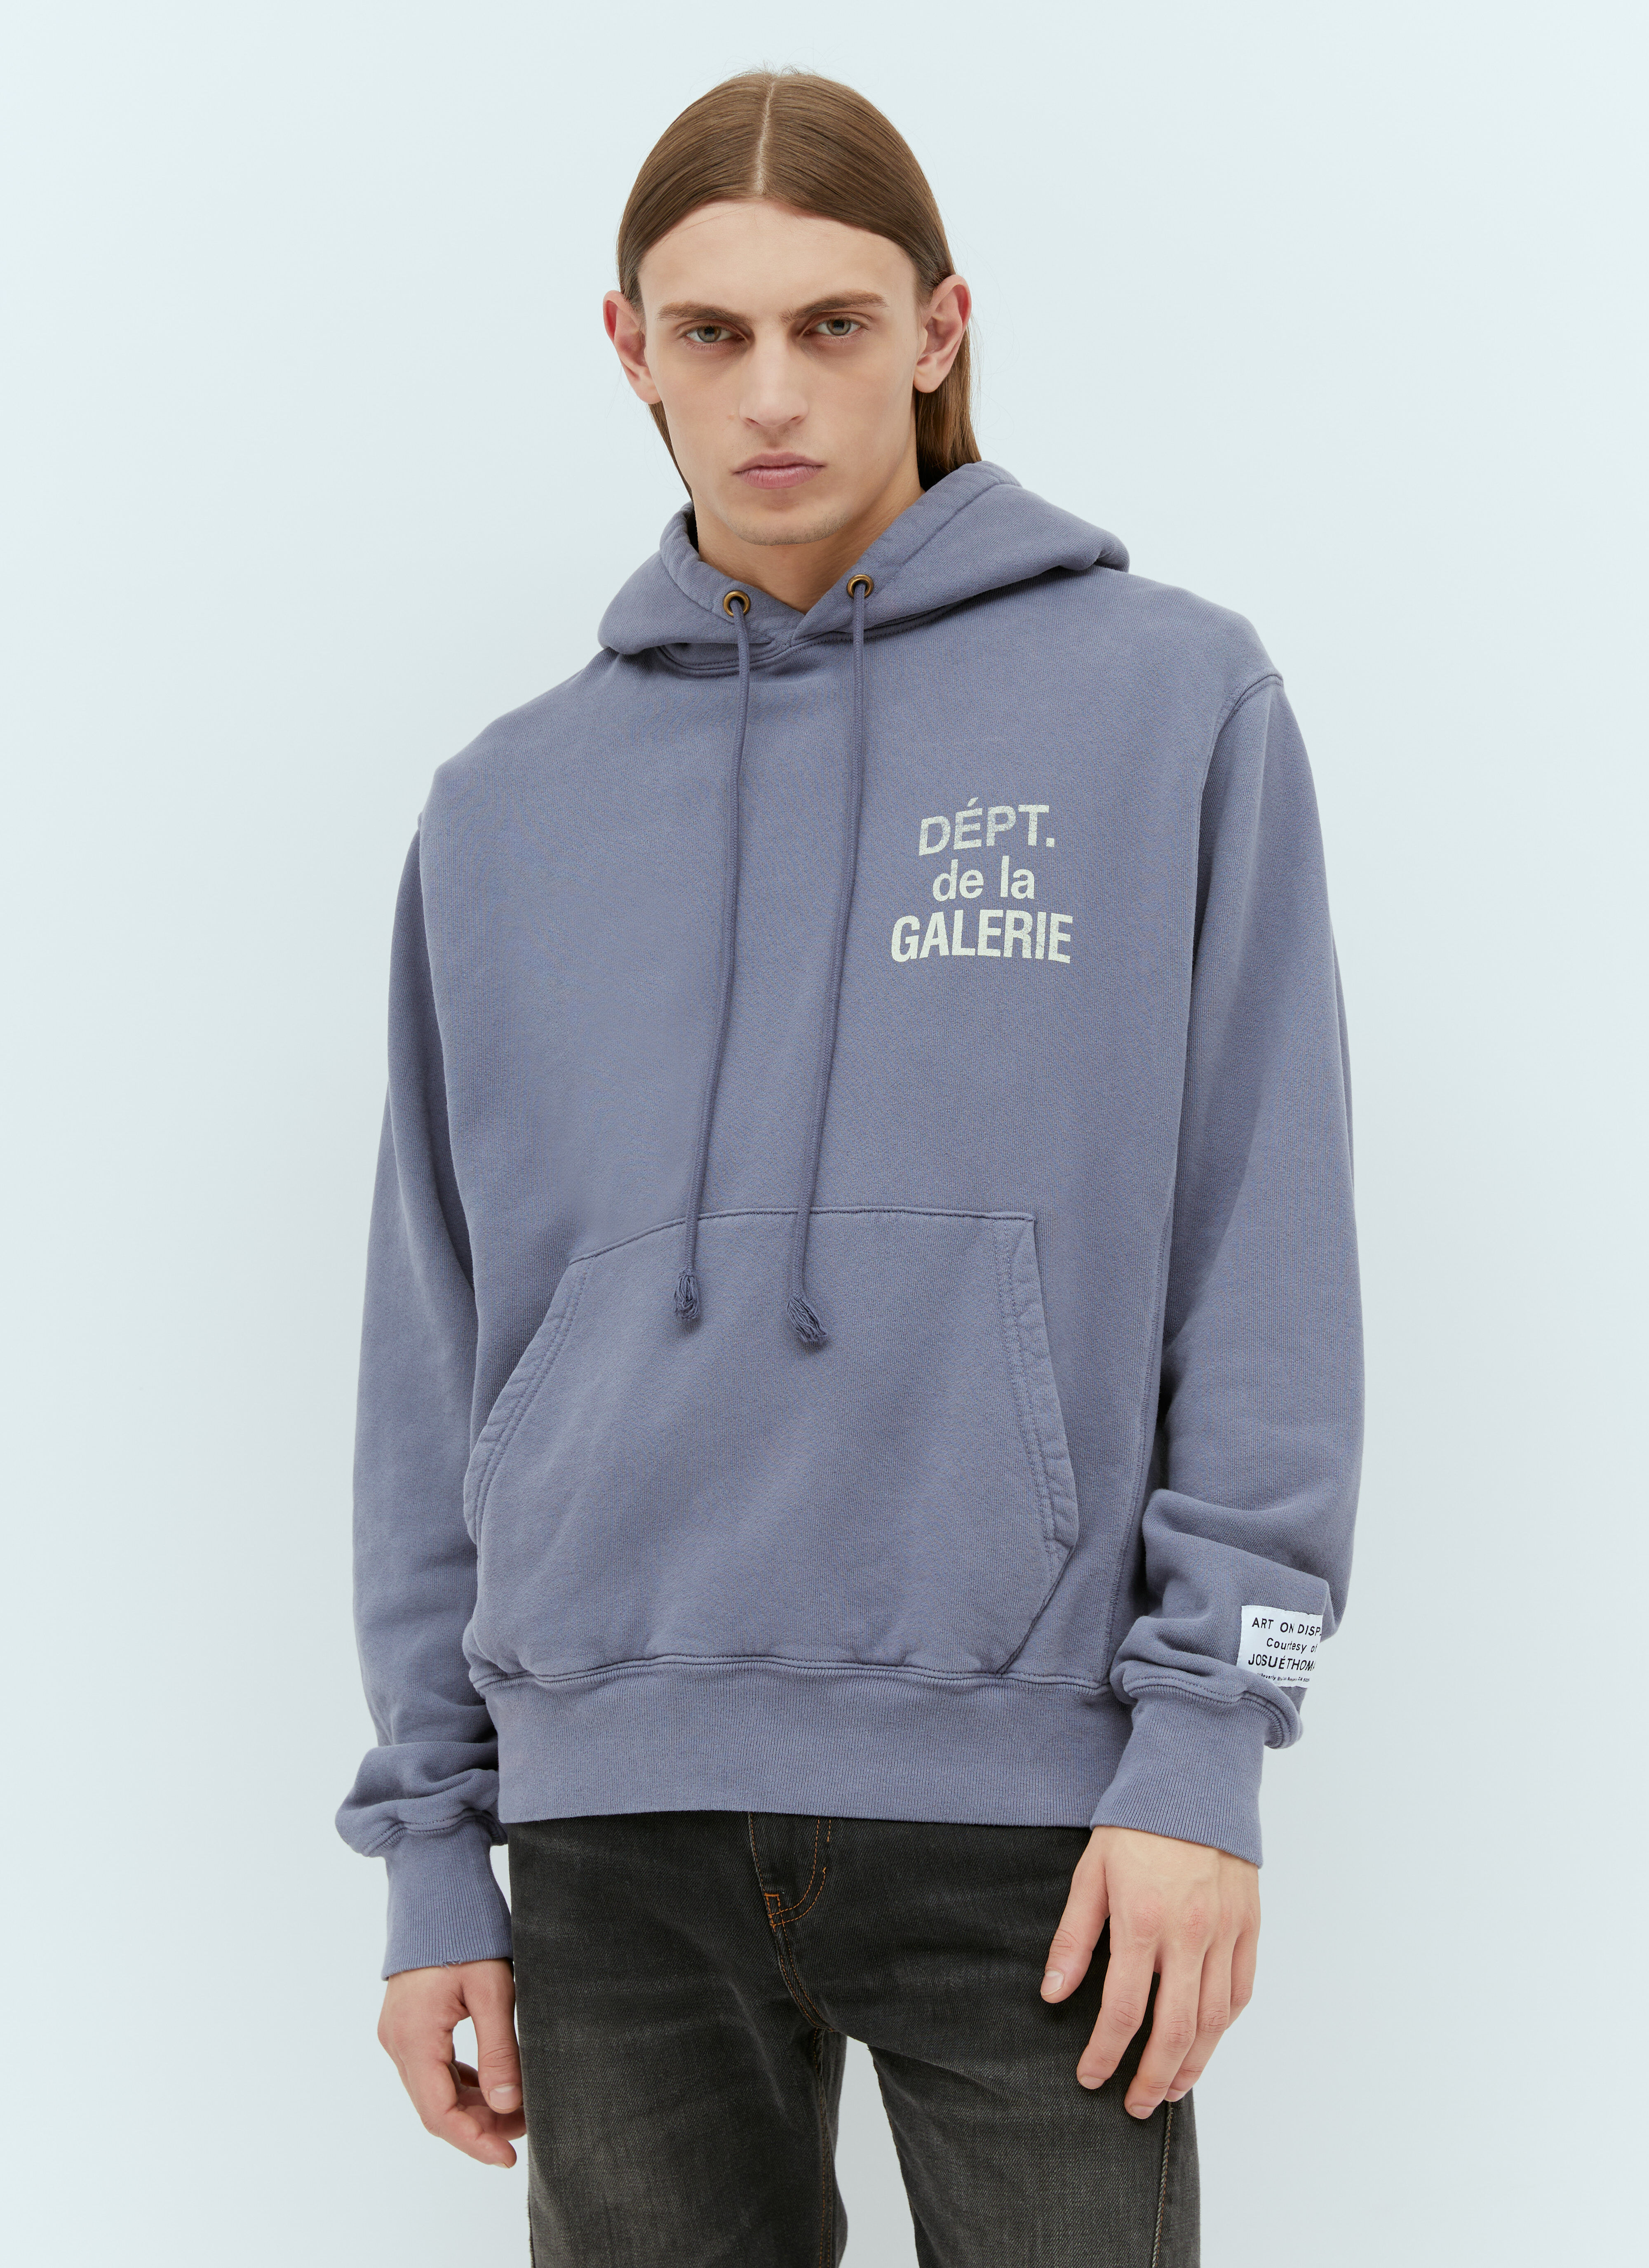 Gallery Dept. French Logo Hooded Sweatshirt White gdp0153021